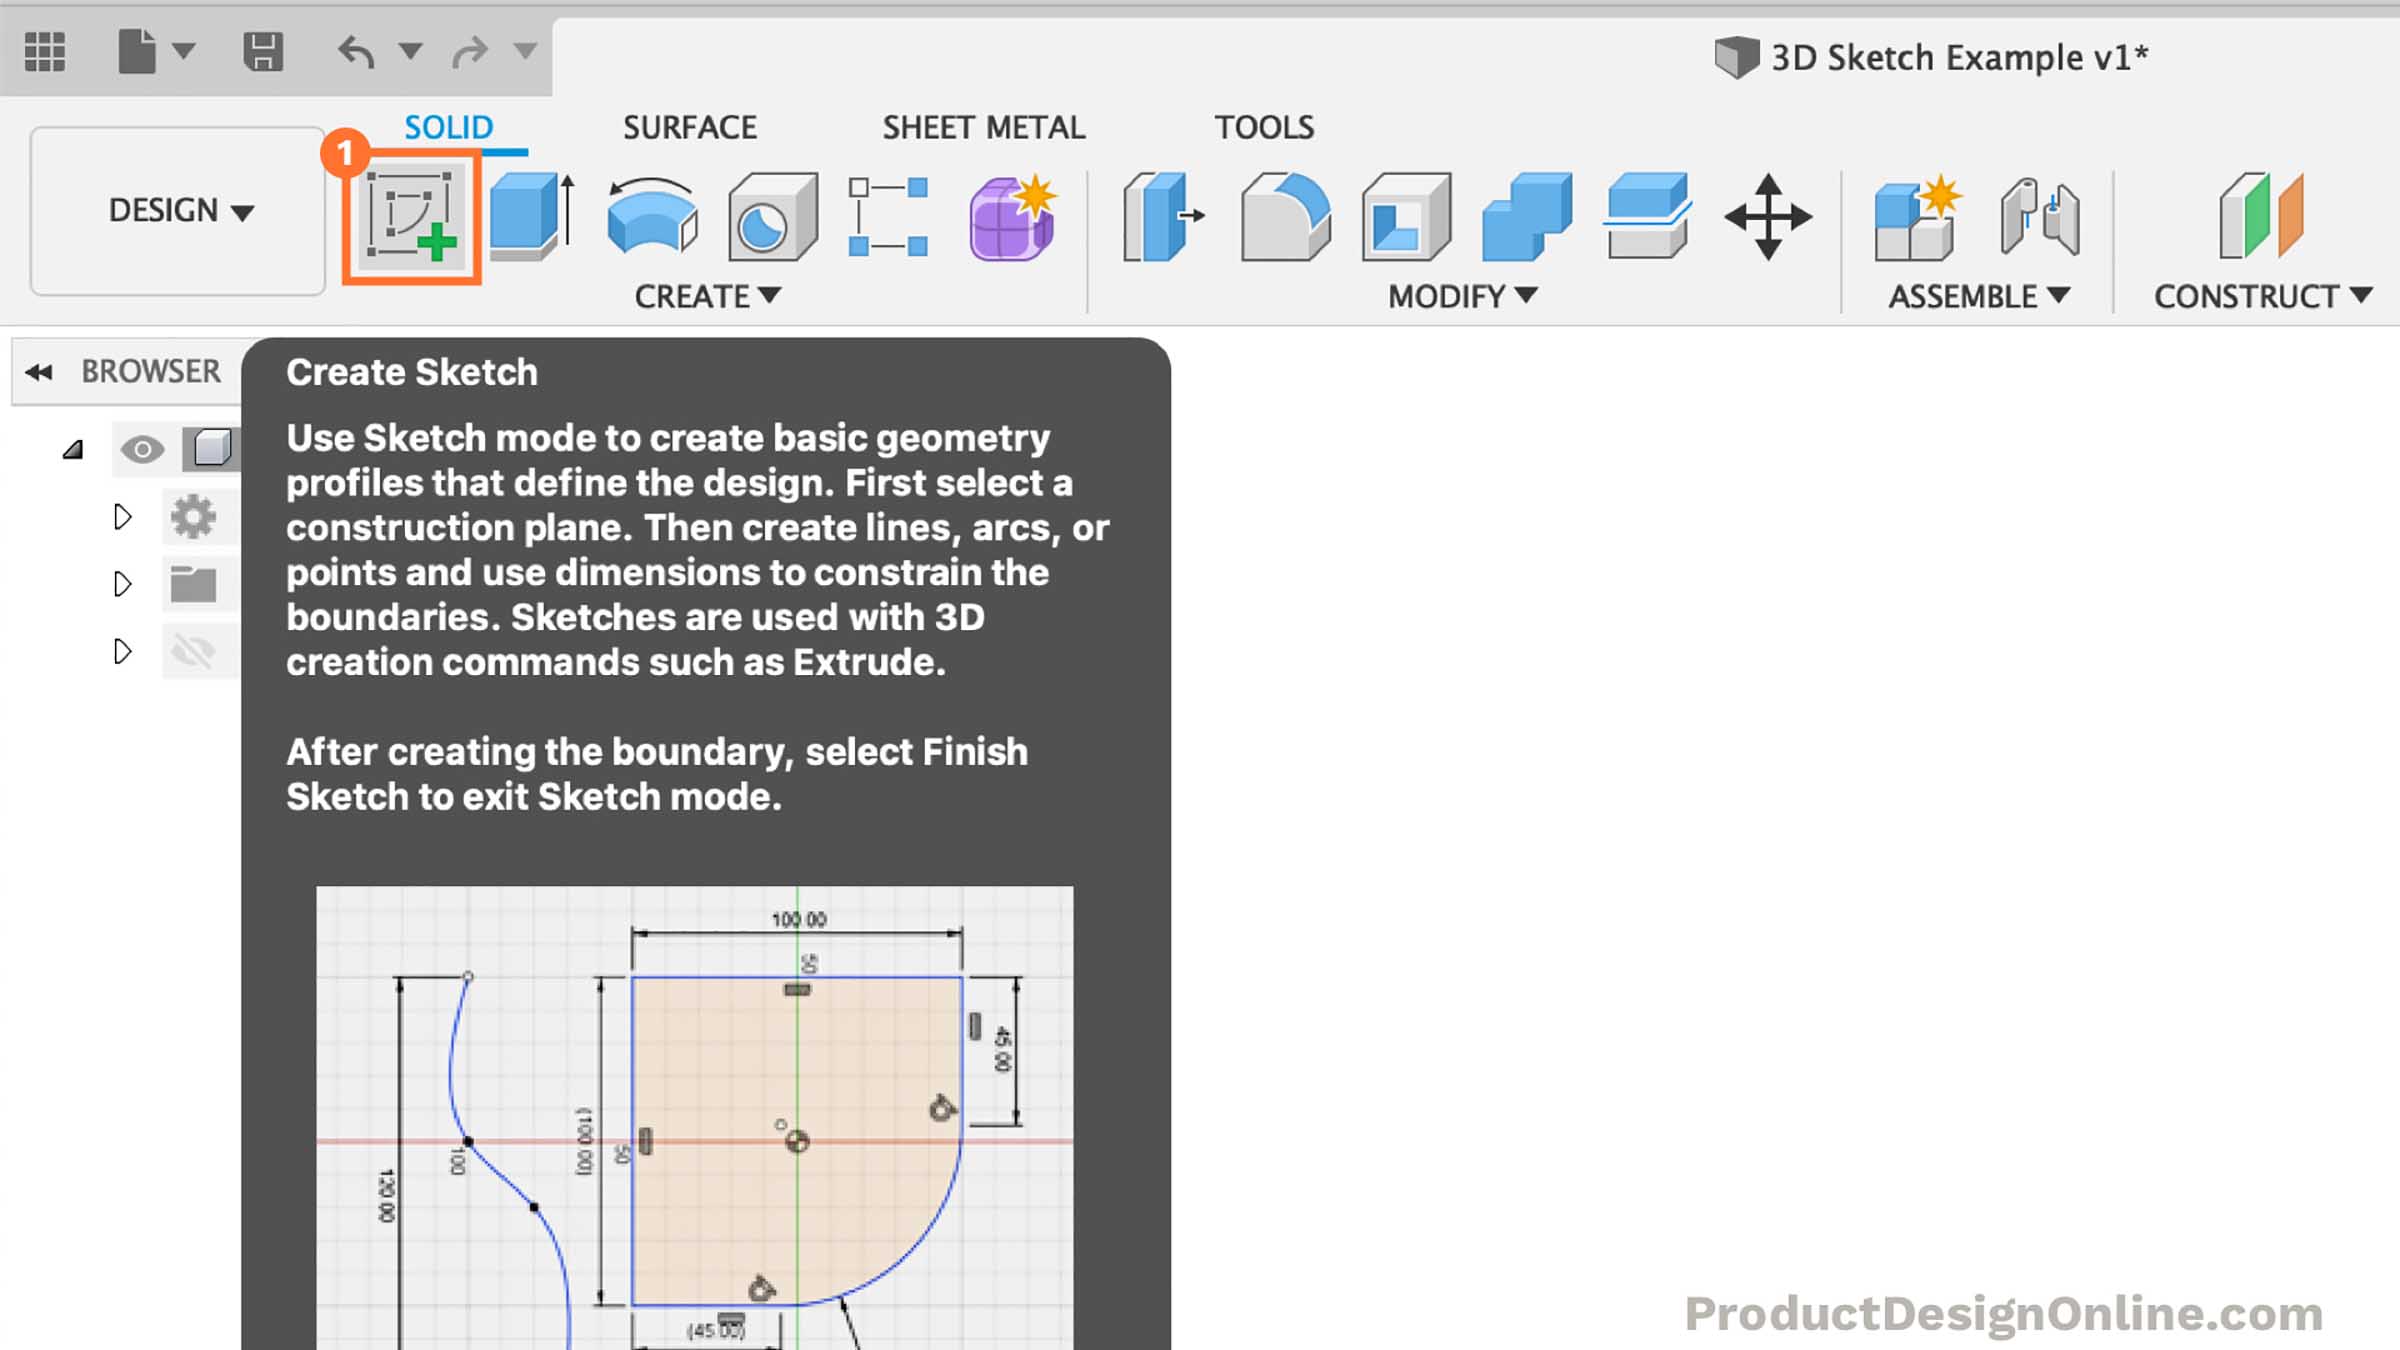 Create Sketch by selecting the button in the Fusion 360 toolbar